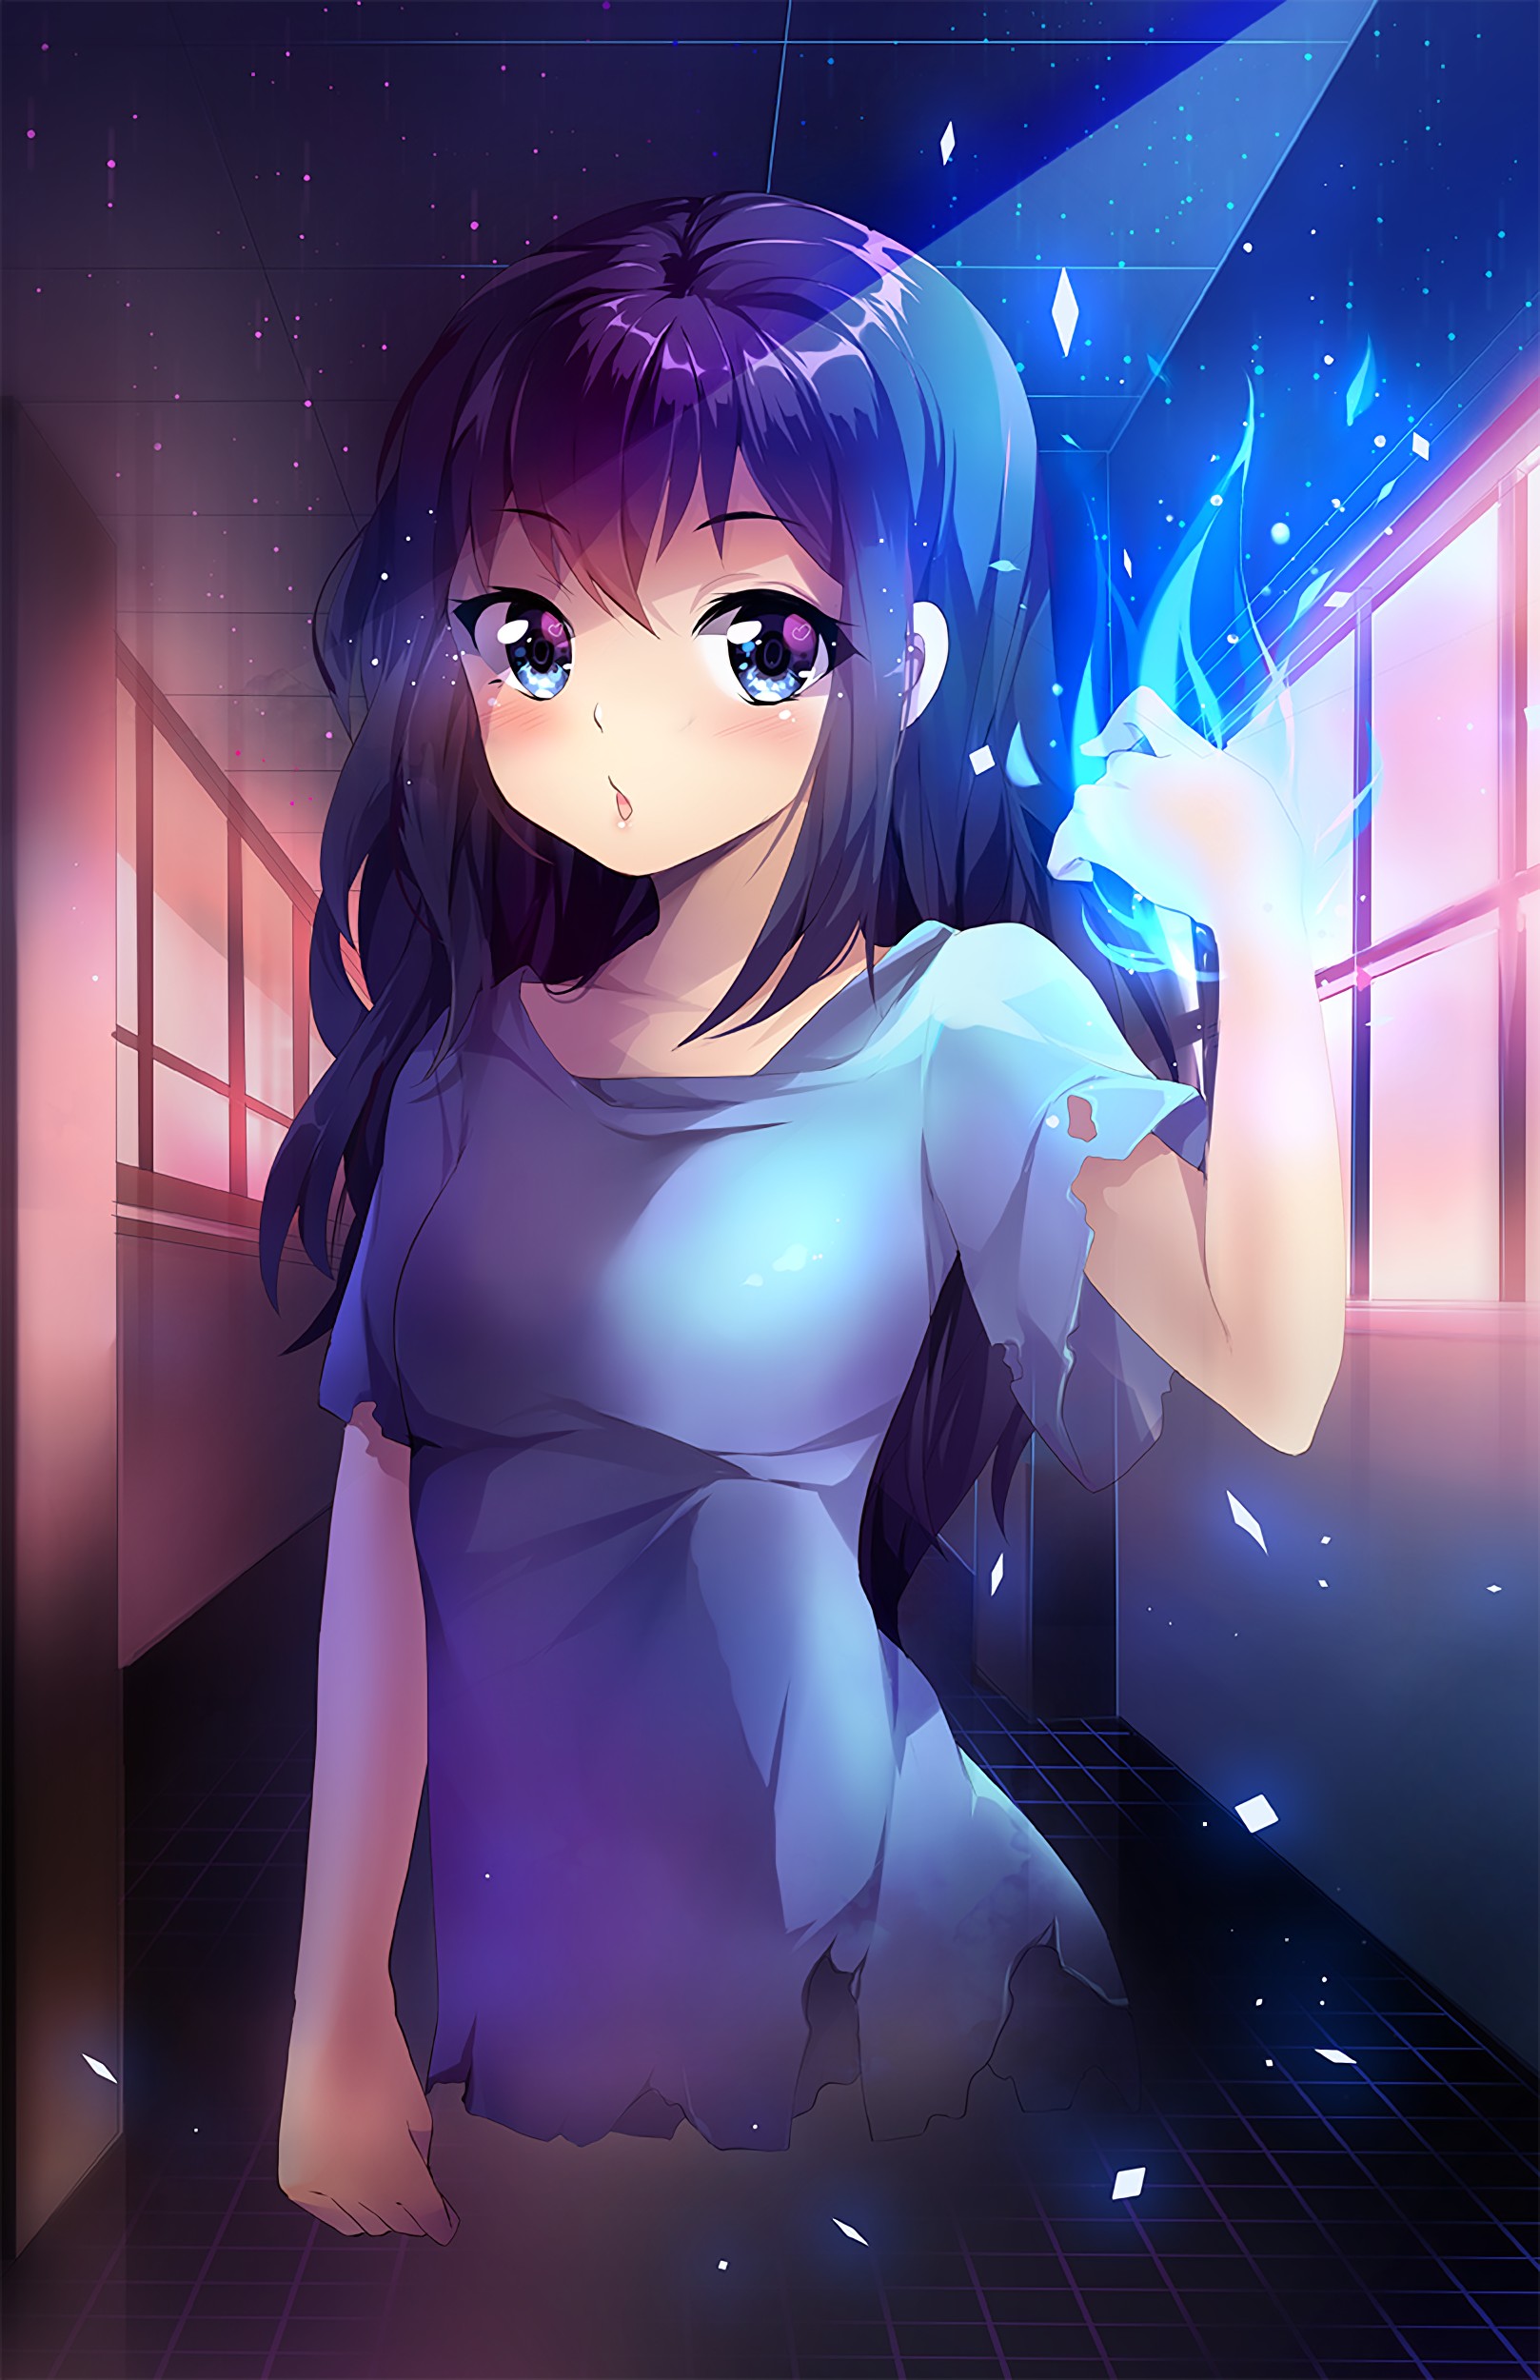 Anime Girl With Long Hair And Blue Eyes 